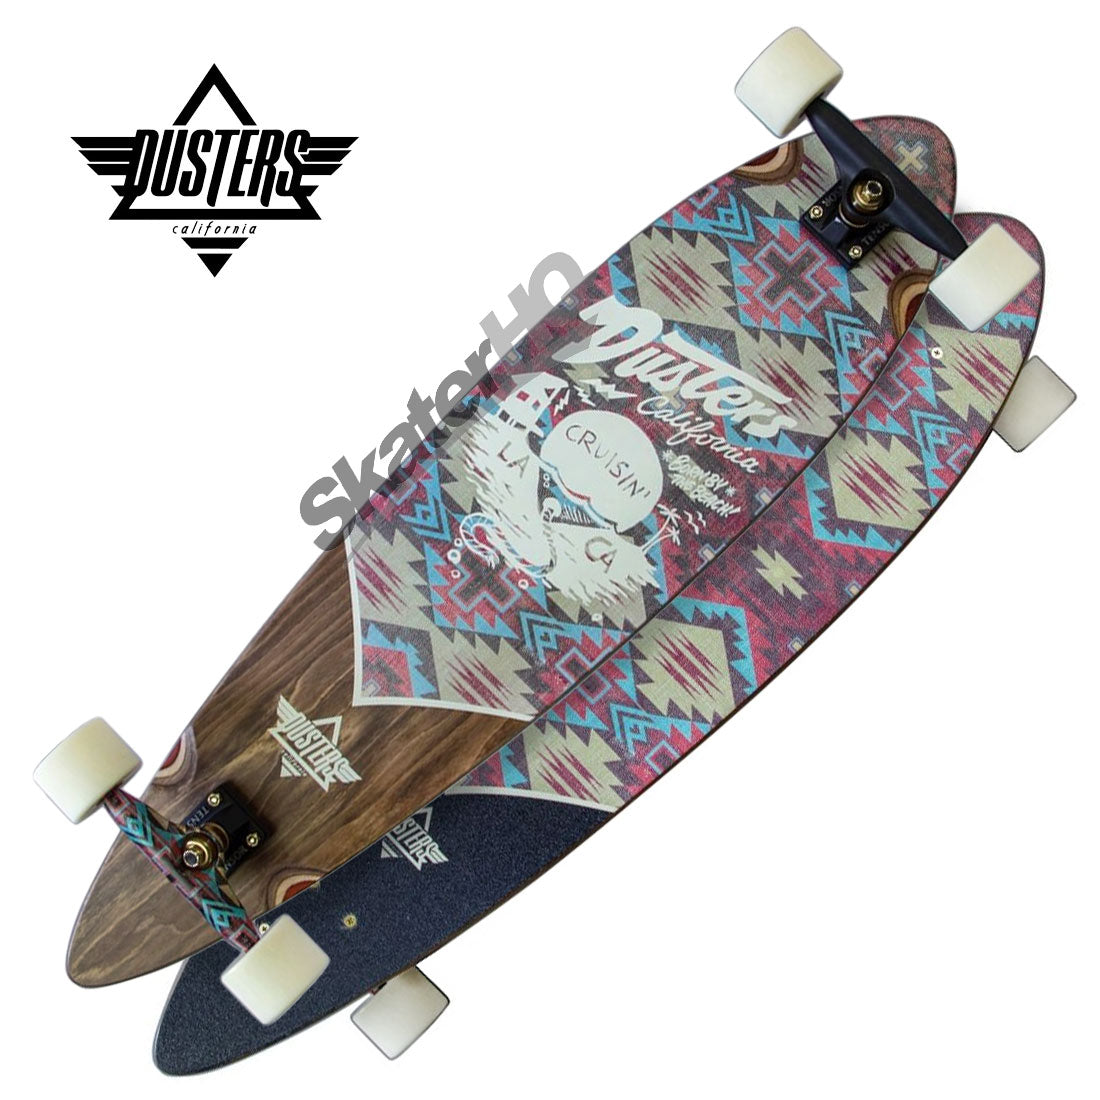 Dusters Cruisin Nomad 37 Complete - Multi Colour Skateboard Completes Longboards